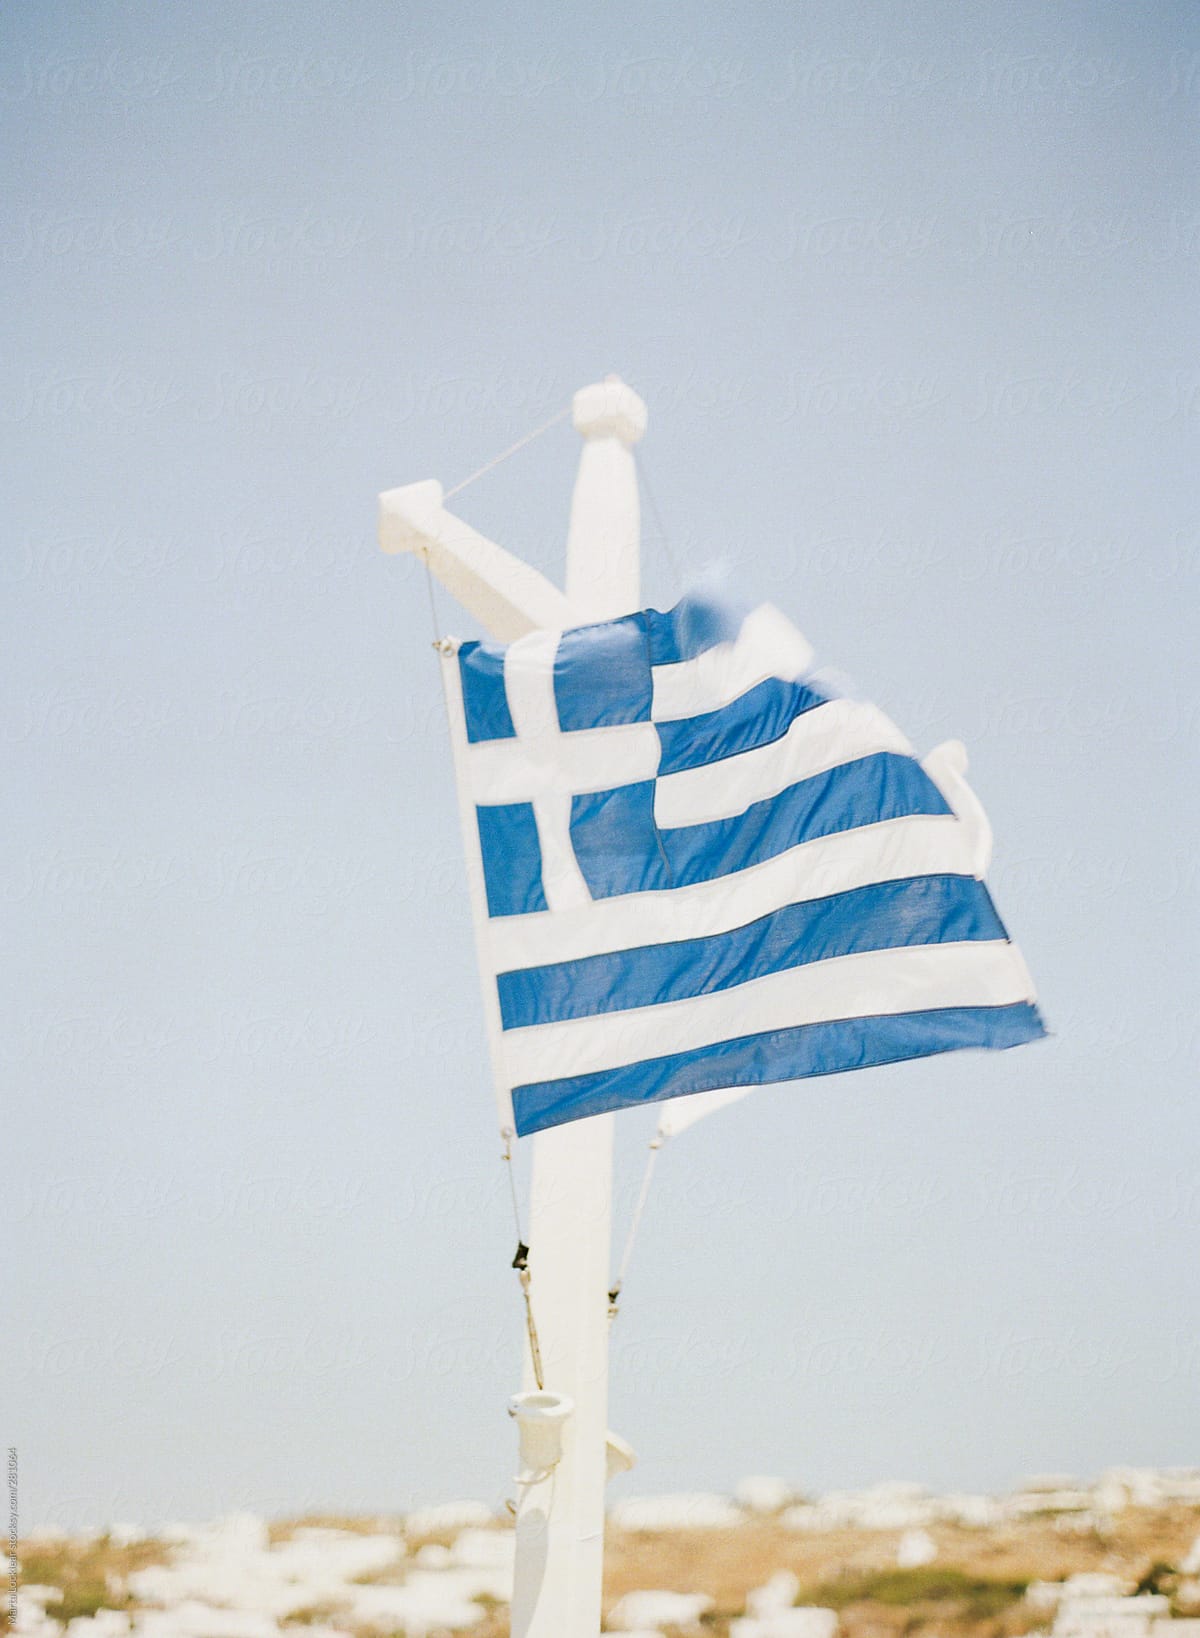 Greece flag in the wind on the island of Mykonos